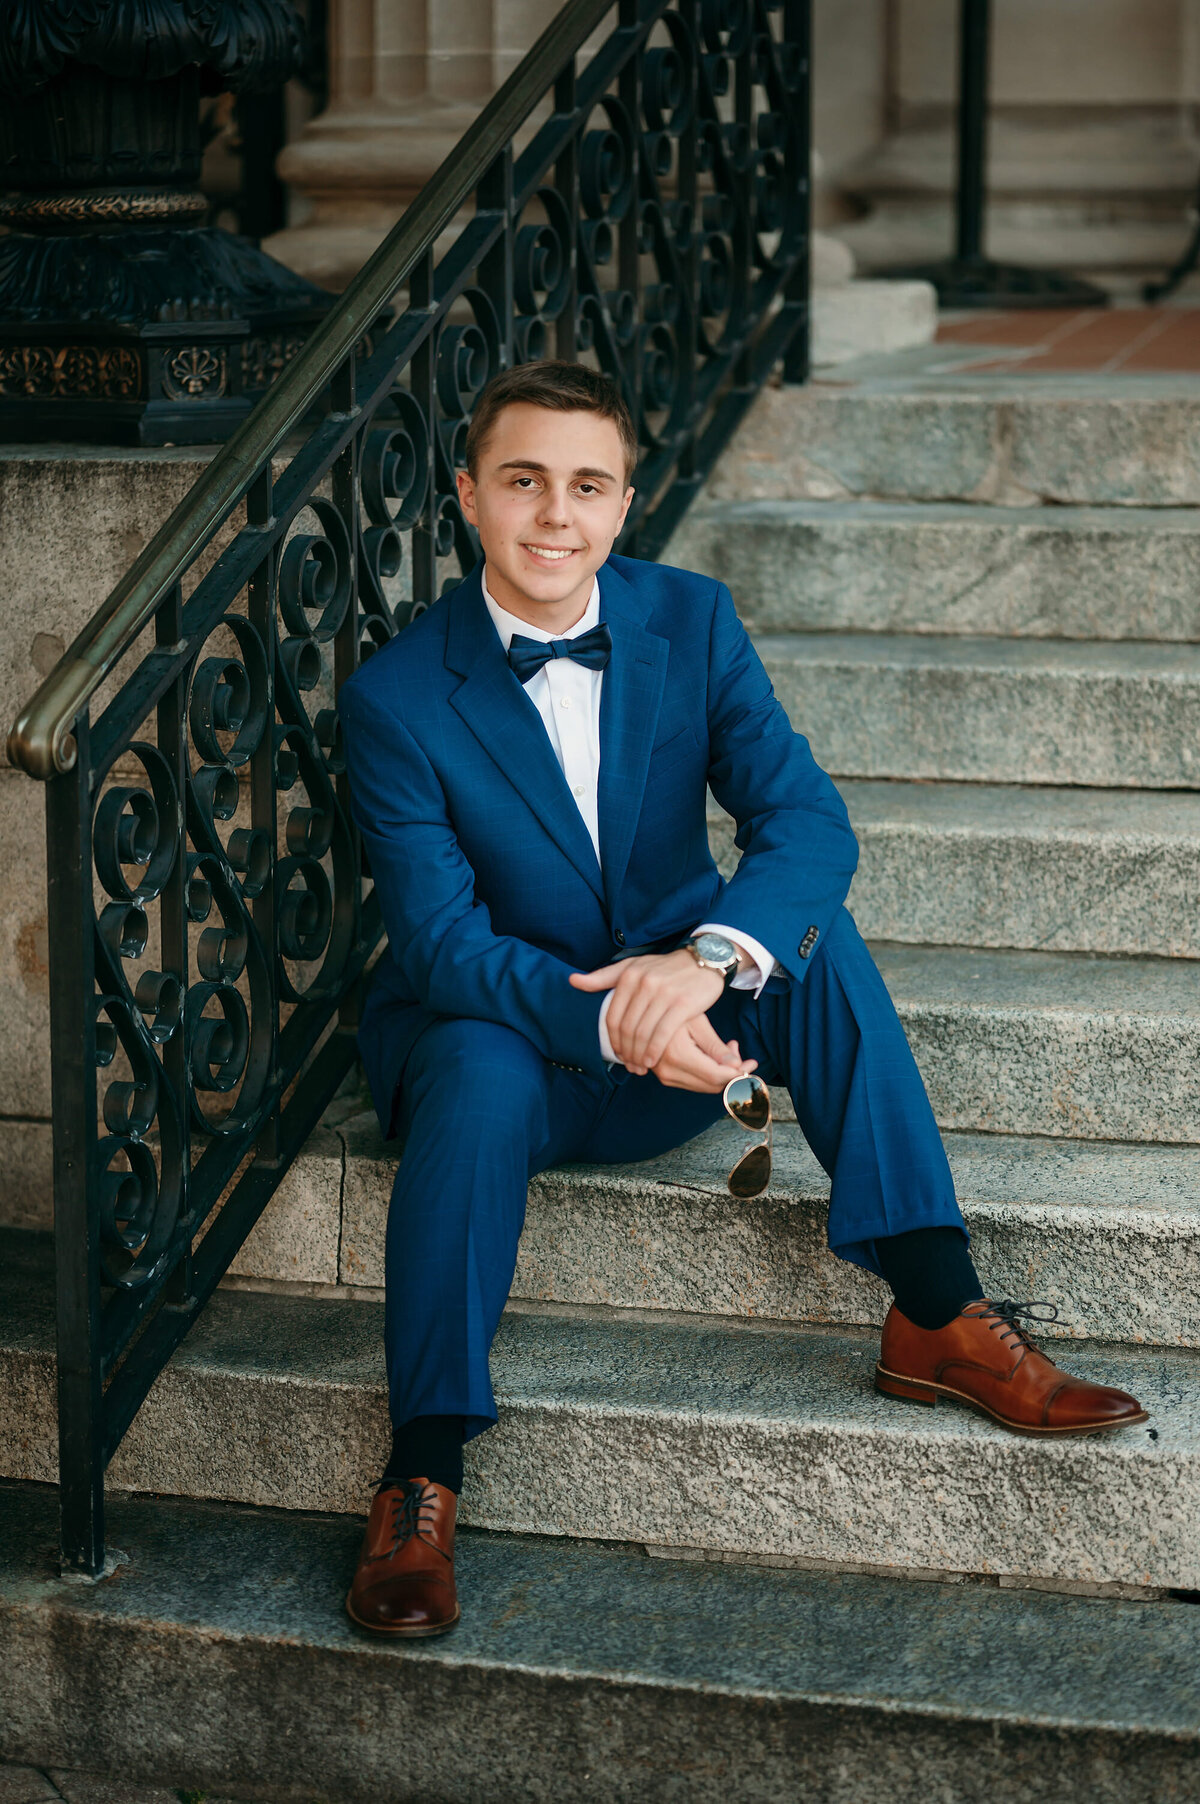 A senior student from Oconomowoc High School sits on a set of concrete steps in Hartland, WI wearing a navy suit and black bow tie.